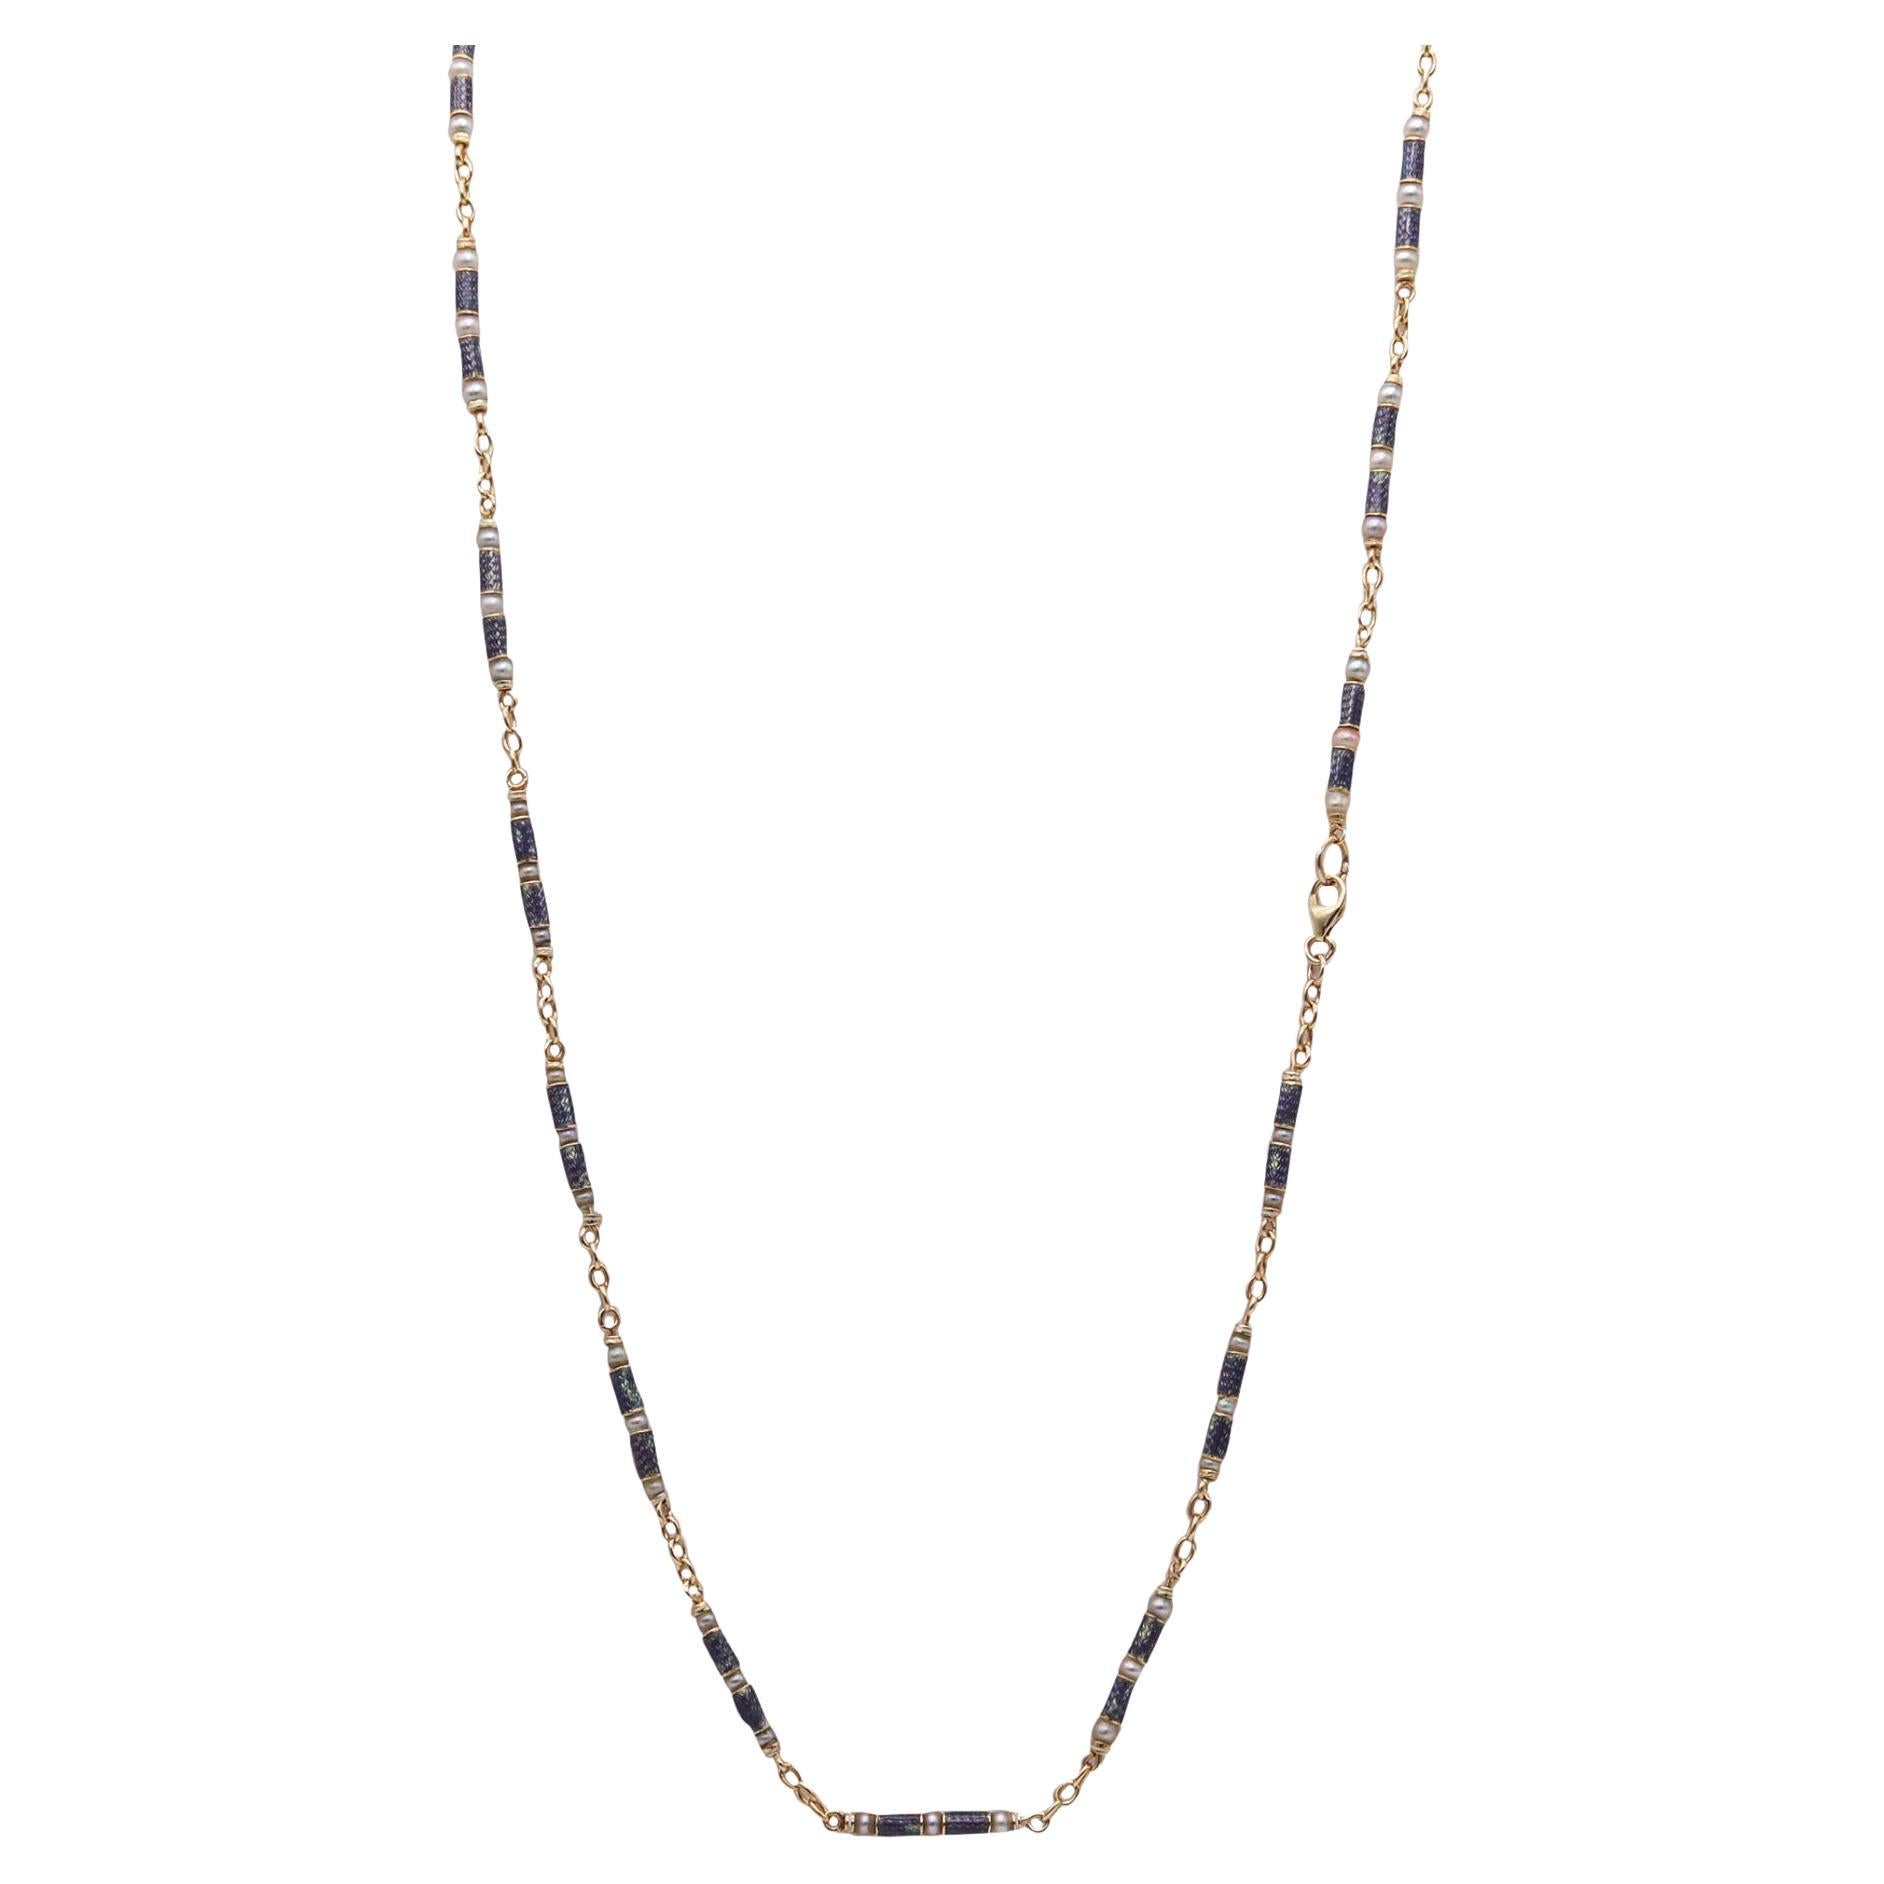 French Edwardian 1900-1905 Pearls Chain In 18Kt Gold With Guilloche Blue Enamel For Sale